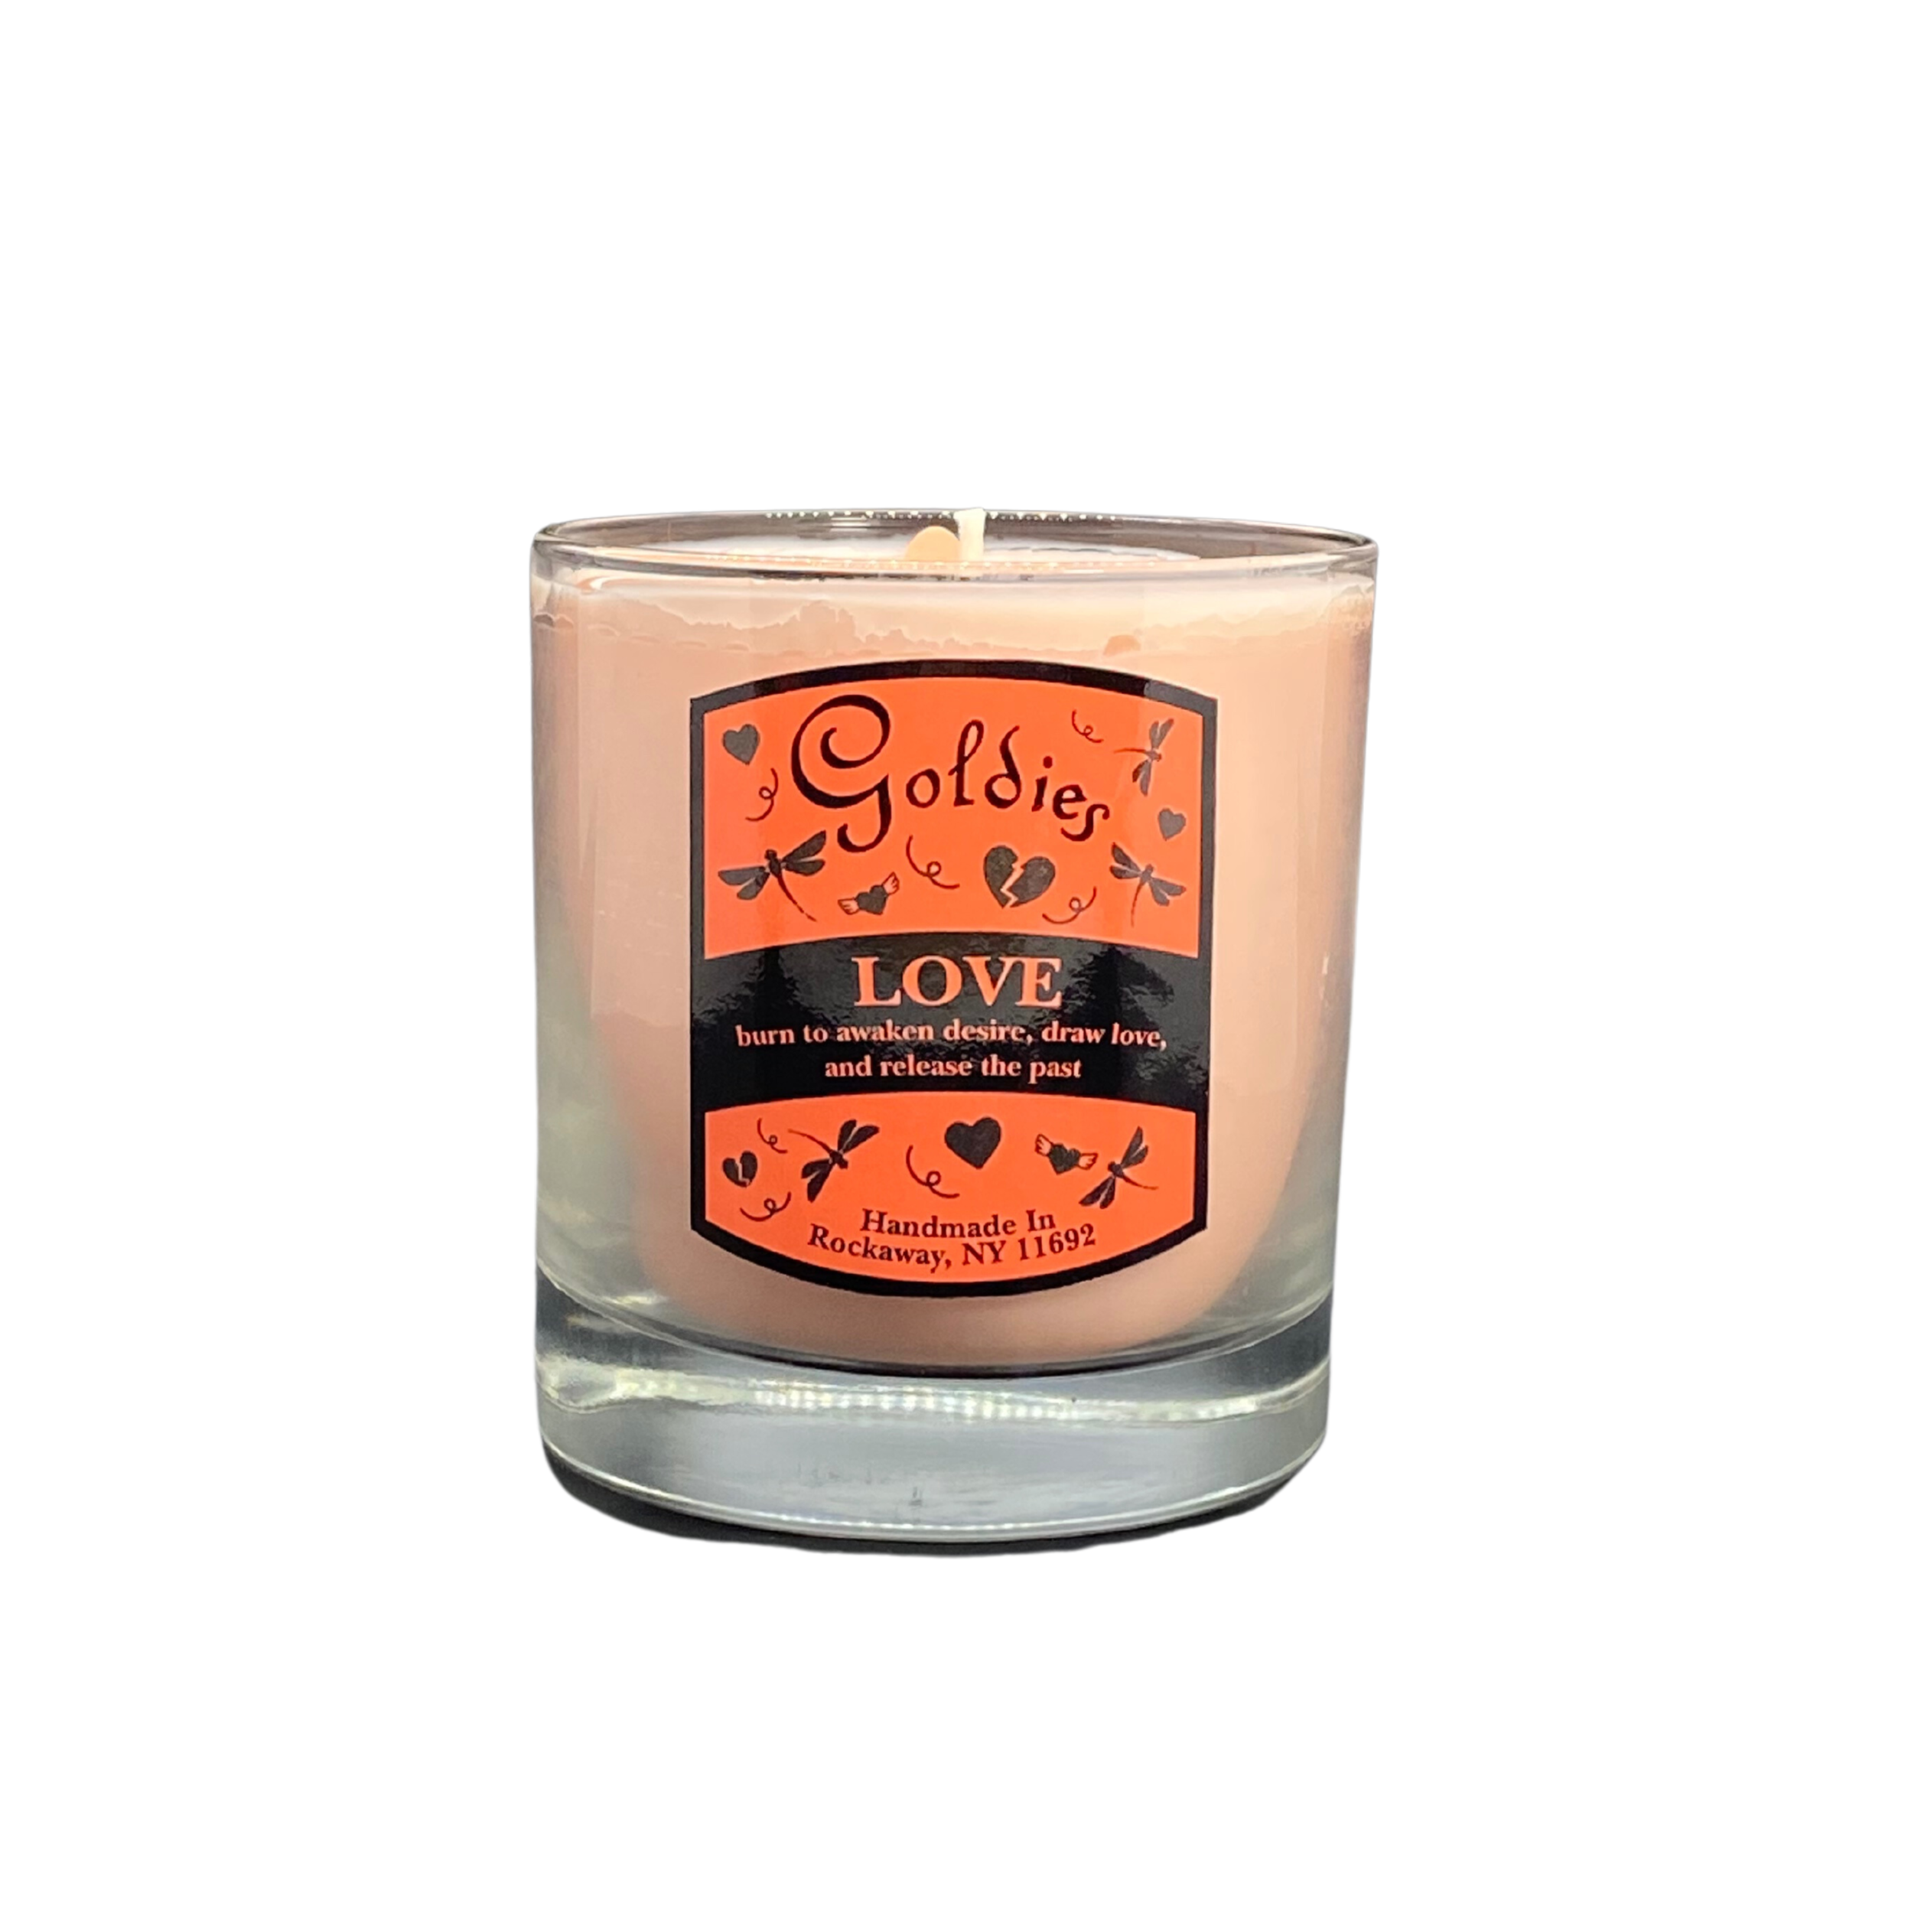 Love Spell Candle